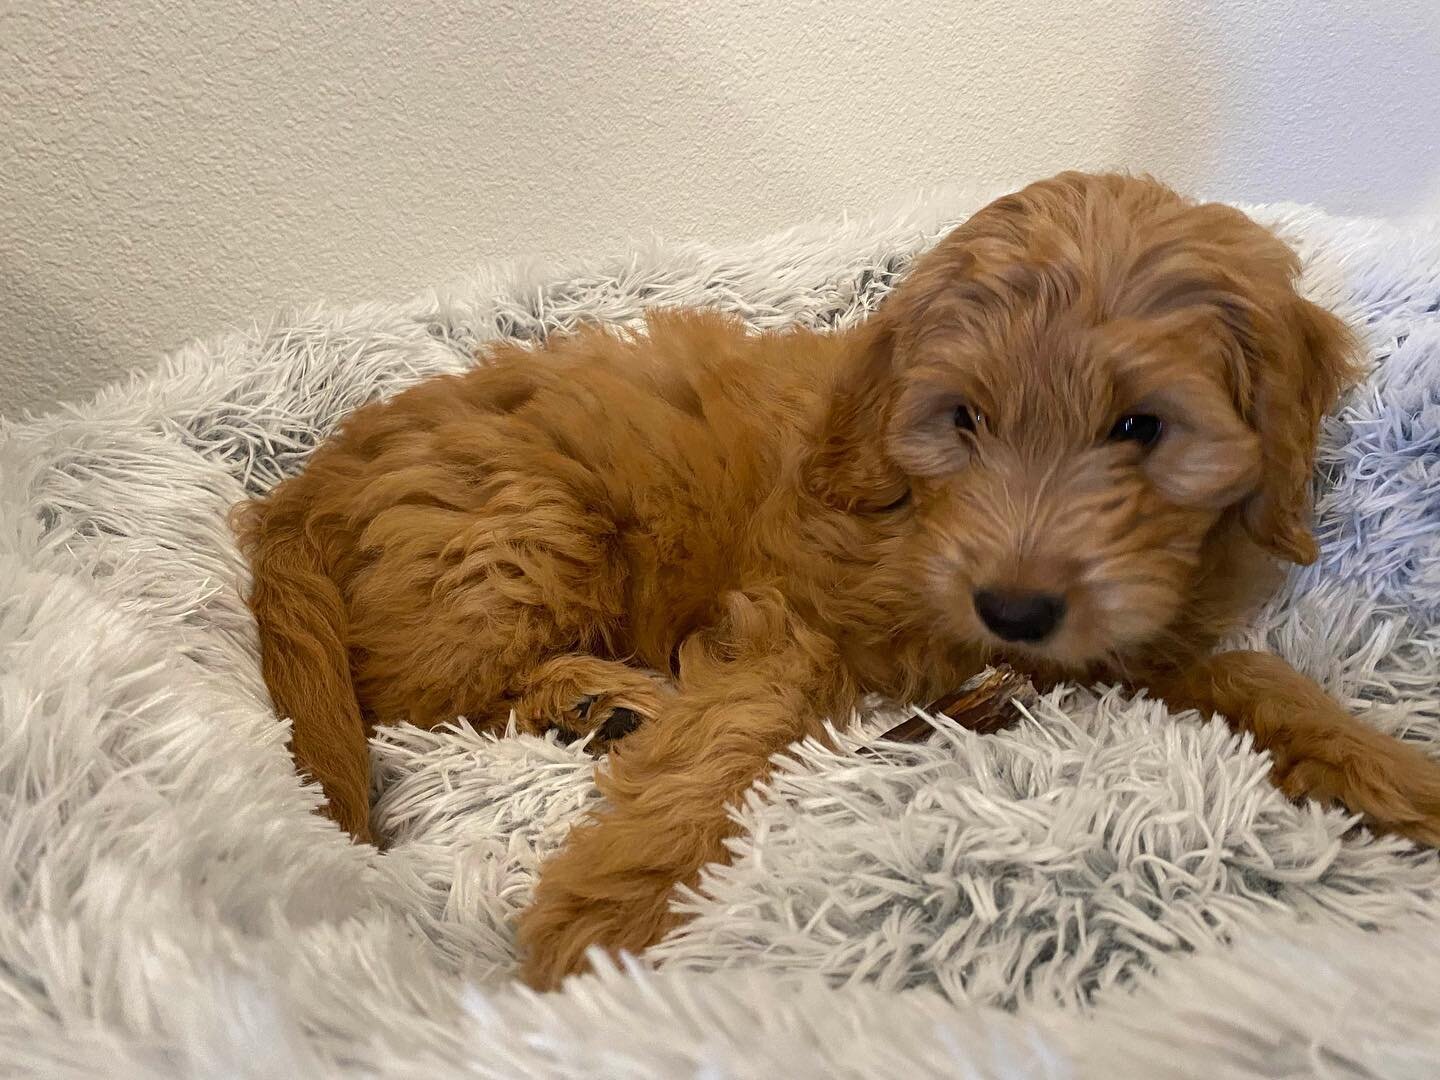 they grow up so fast 🥲 #winecountrygoldendoodles #wcgd